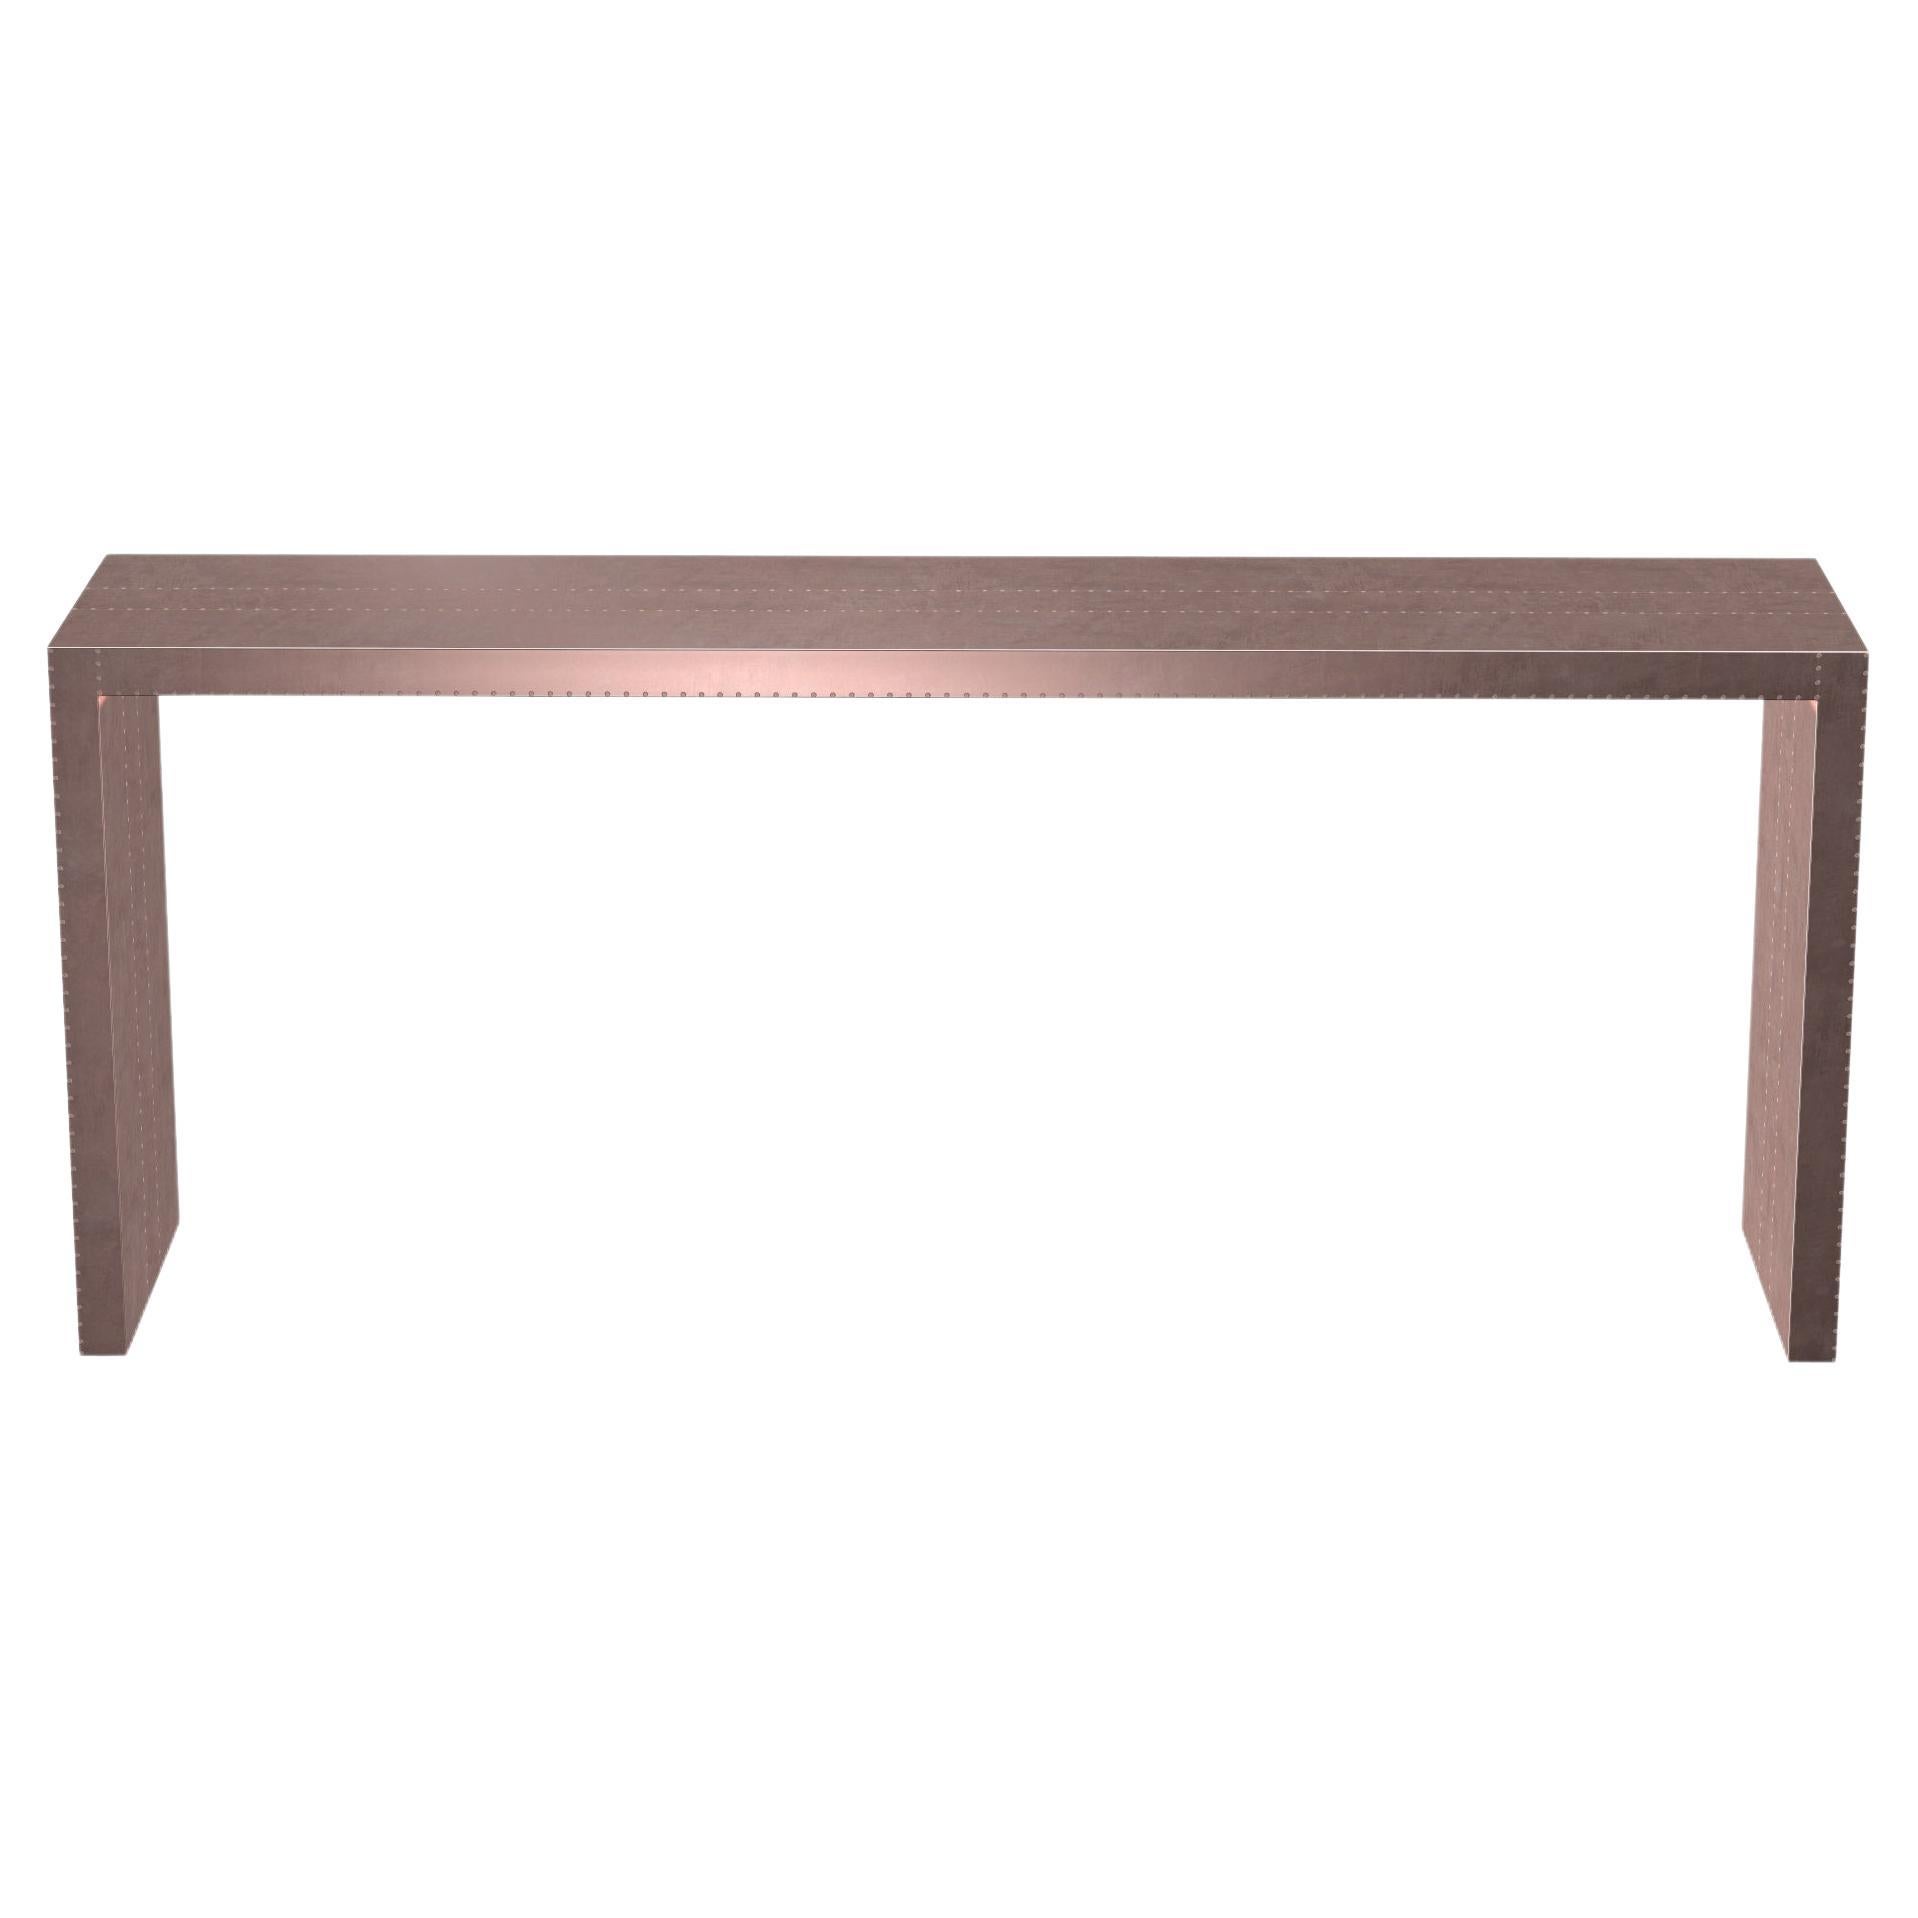 Art Deco Game Tables Rectangular Console in Smooth Copper by Alison Spear